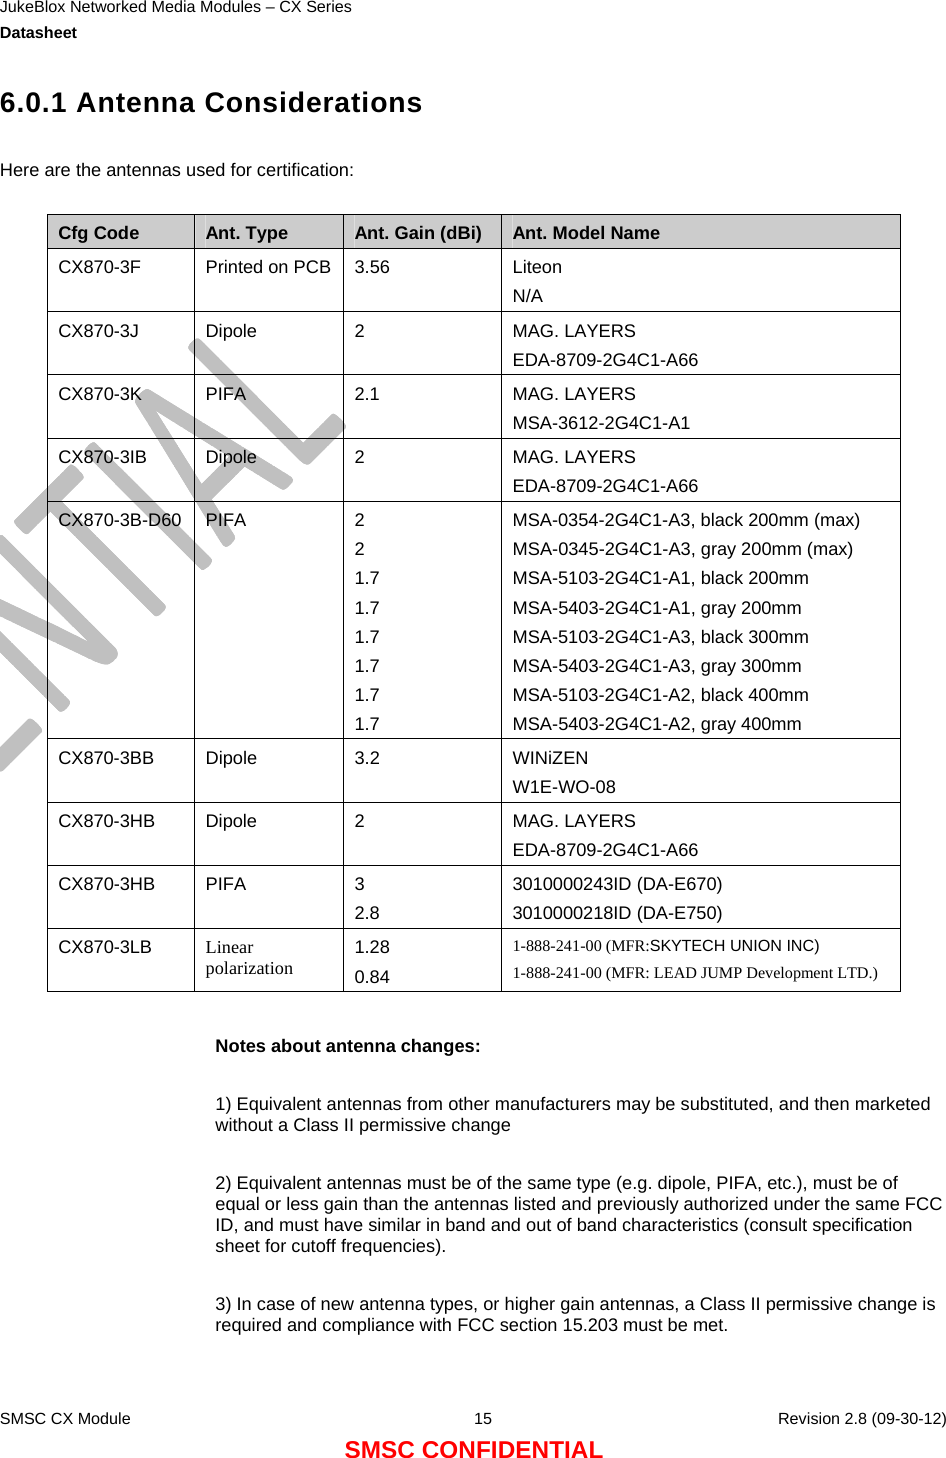 JukeBlox Networked Media Modules – CX Series  Datasheet    SMSC CX Module  15    Revision 2.8 (09-30-12) SMSC CONFIDENTIAL 6.0.1 Antenna Considerations  Here are the antennas used for certification:   Cfg Code  Ant. Type  Ant. Gain (dBi)  Ant. Model Name CX870-3F  Printed on PCB  3.56  Liteon N/A CX870-3J Dipole  2  MAG. LAYERS EDA-8709-2G4C1-A66 CX870-3K PIFA  2.1  MAG. LAYERS MSA-3612-2G4C1-A1 CX870-3IB Dipole  2  MAG. LAYERS EDA-8709-2G4C1-A66 CX870-3B-D60 PIFA  2 2 1.7 1.7 1.7 1.7 1.7 1.7 MSA-0354-2G4C1-A3, black 200mm (max) MSA-0345-2G4C1-A3, gray 200mm (max) MSA-5103-2G4C1-A1, black 200mm MSA-5403-2G4C1-A1, gray 200mm MSA-5103-2G4C1-A3, black 300mm MSA-5403-2G4C1-A3, gray 300mm MSA-5103-2G4C1-A2, black 400mm MSA-5403-2G4C1-A2, gray 400mm CX870-3BB Dipole  3.2  WINiZEN W1E-WO-08 CX870-3HB Dipole  2  MAG. LAYERS EDA-8709-2G4C1-A66 CX870-3HB PIFA  3 2.8 3010000243ID (DA-E670) 3010000218ID (DA-E750) CX870-3LB  Linear polarization 1.28 0.84 1-888-241-00 (MFR:SKYTECH UNION INC) 1-888-241-00 (MFR: LEAD JUMP Development LTD.)  Notes about antenna changes:   1) Equivalent antennas from other manufacturers may be substituted, and then marketed without a Class II permissive change  2) Equivalent antennas must be of the same type (e.g. dipole, PIFA, etc.), must be of equal or less gain than the antennas listed and previously authorized under the same FCC ID, and must have similar in band and out of band characteristics (consult specification sheet for cutoff frequencies).  3) In case of new antenna types, or higher gain antennas, a Class II permissive change is required and compliance with FCC section 15.203 must be met. 